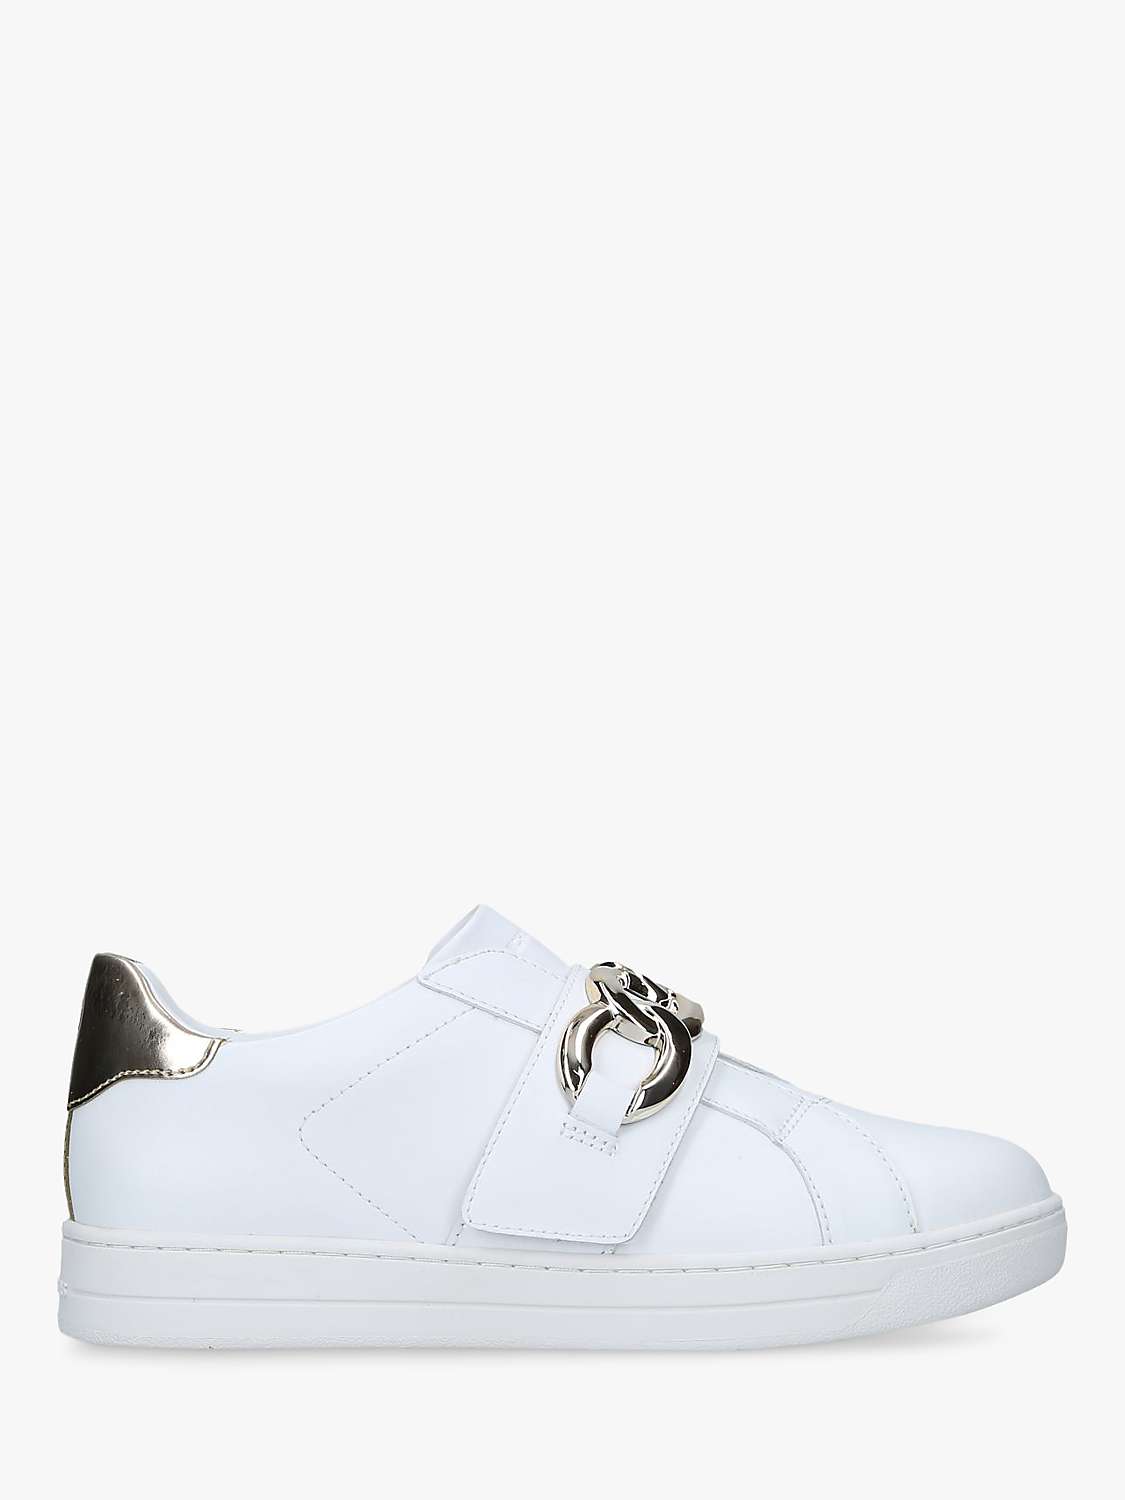 Buy MICHAEL Michael Kors Kenna Chain Link Leather Trainers, White Online at johnlewis.com